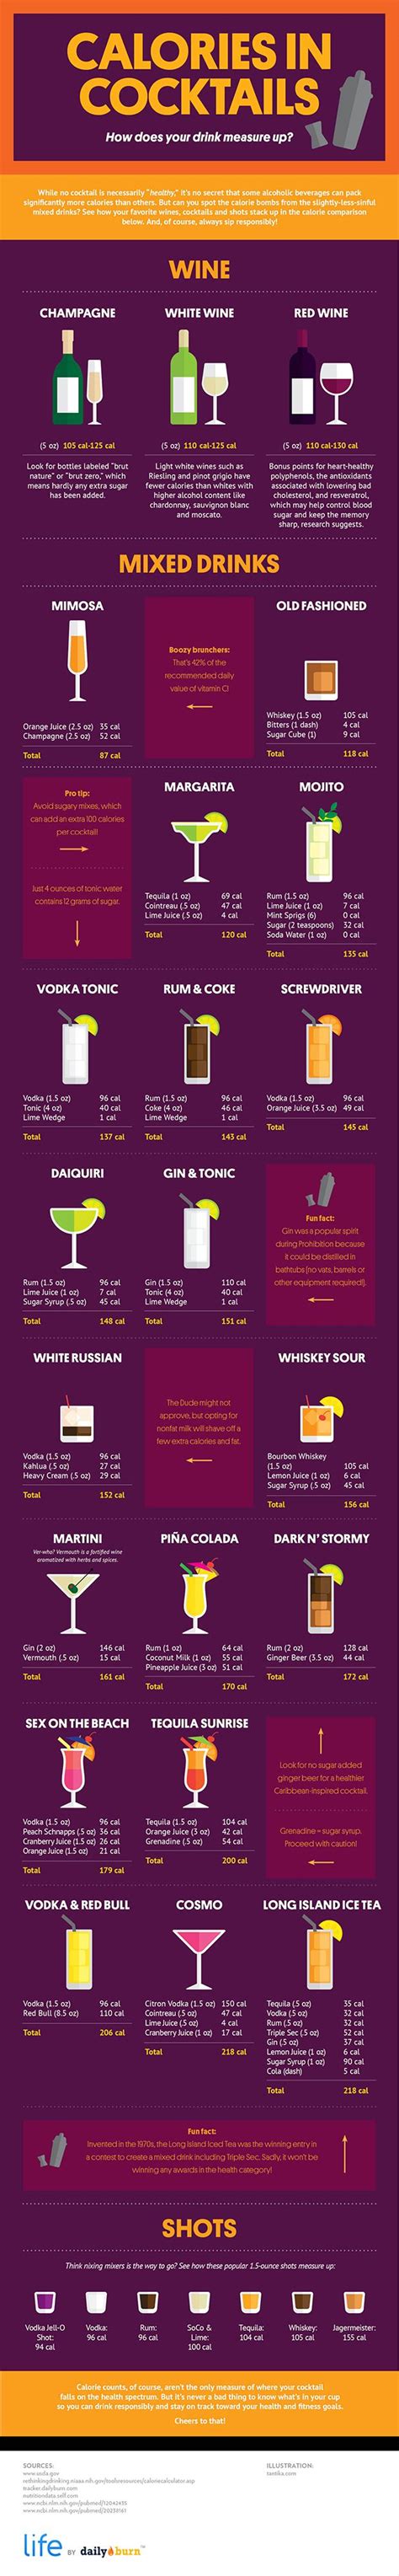 Calories in Cocktails: How Your Drink Measures Up #infographic #healthy ...